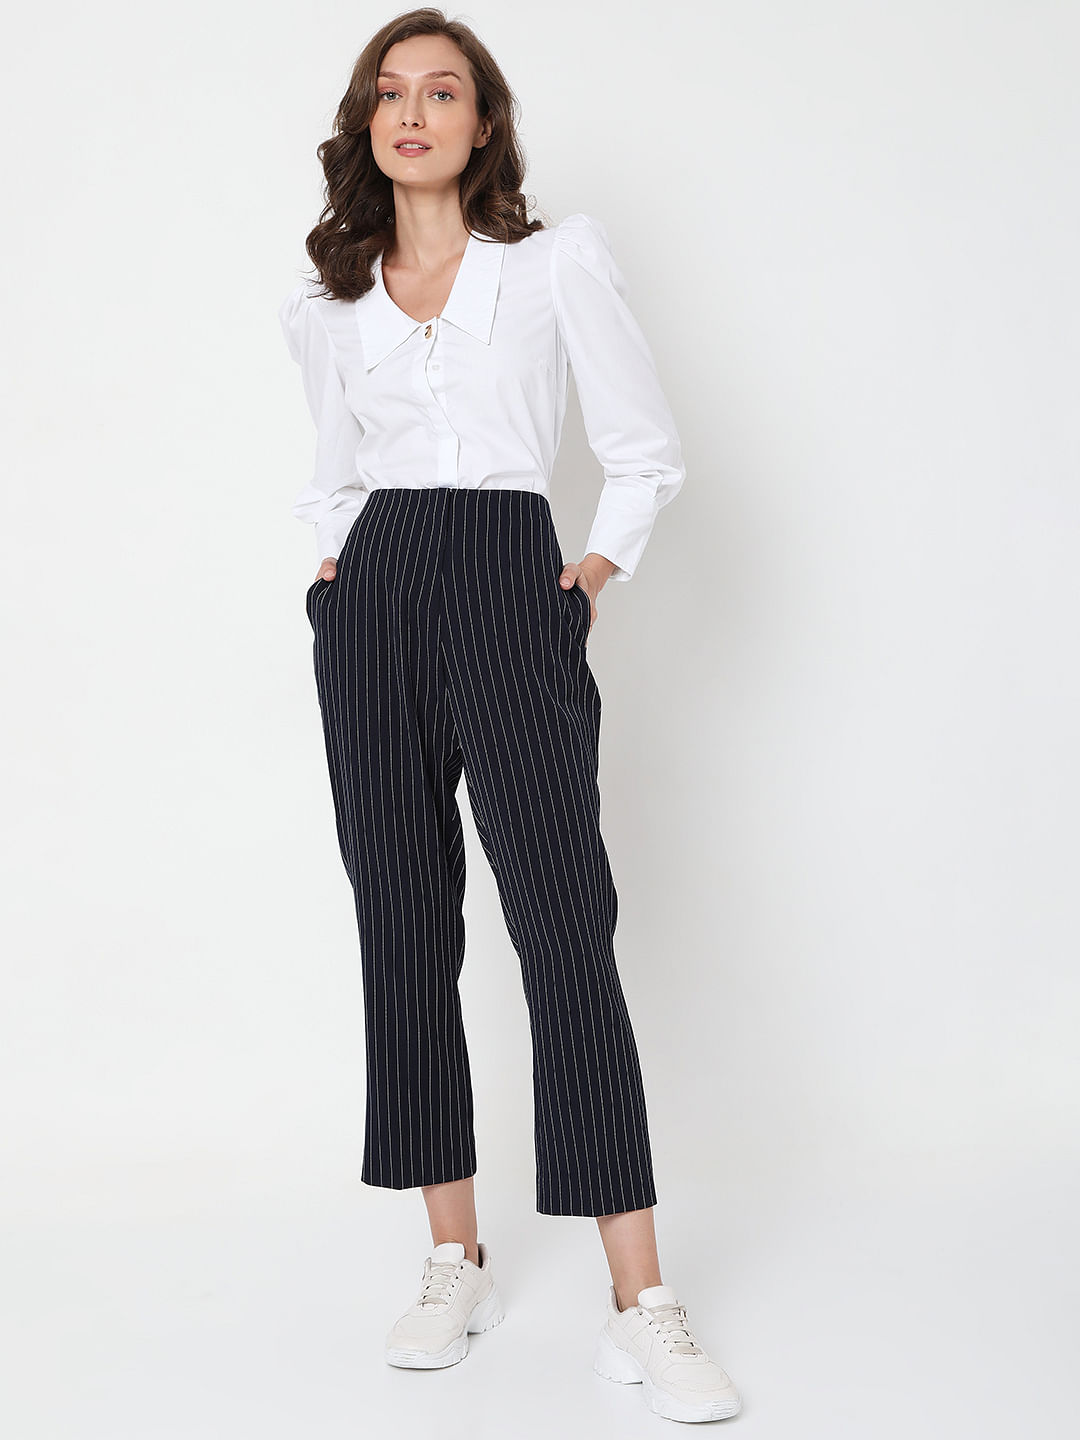 Black And White Striped Pants  Buy Black And White Striped Pants online at  Best Prices in India  Flipkartcom